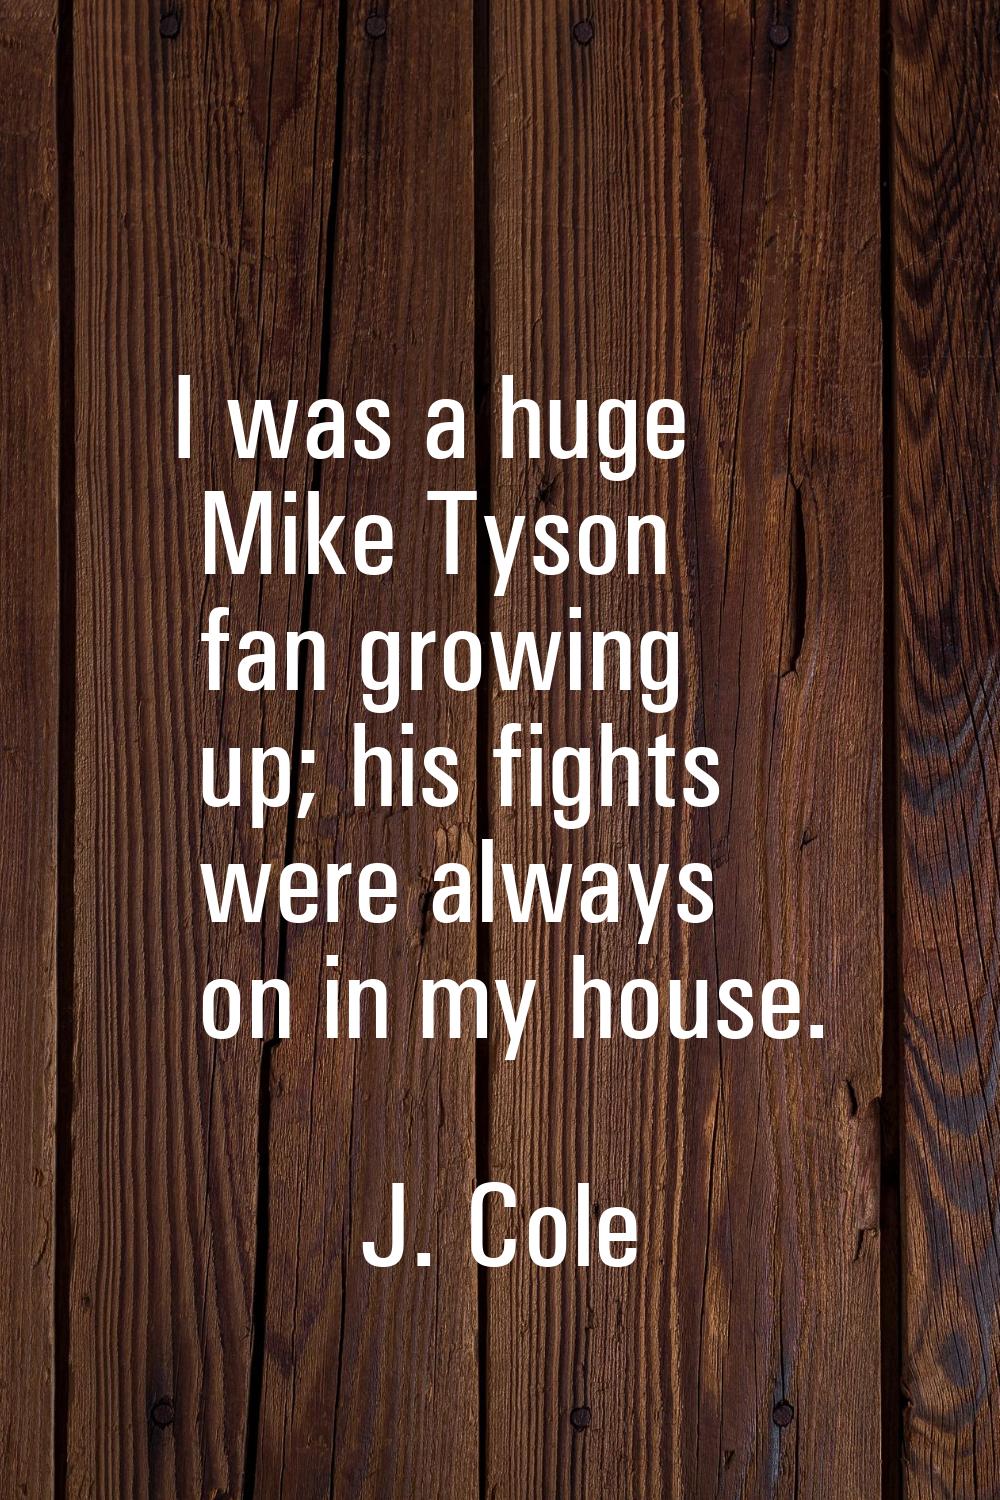 I was a huge Mike Tyson fan growing up; his fights were always on in my house.